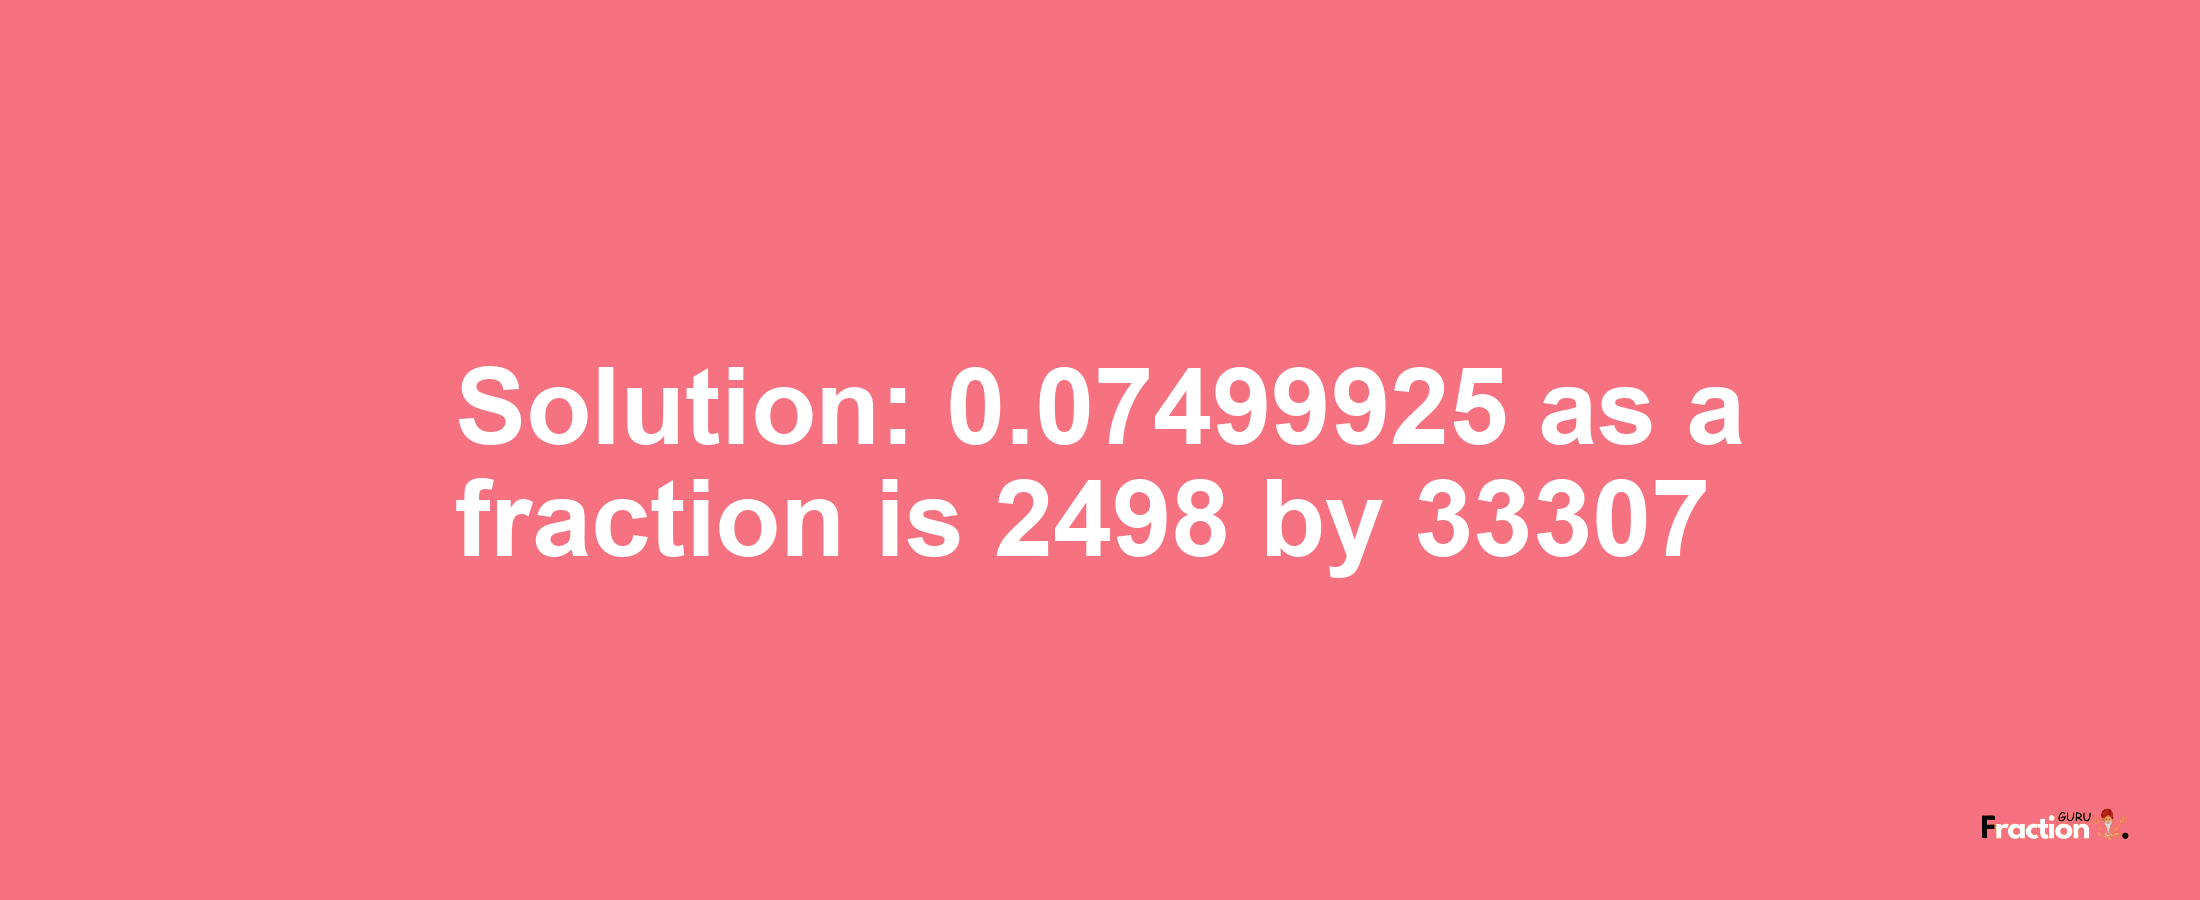 Solution:0.07499925 as a fraction is 2498/33307